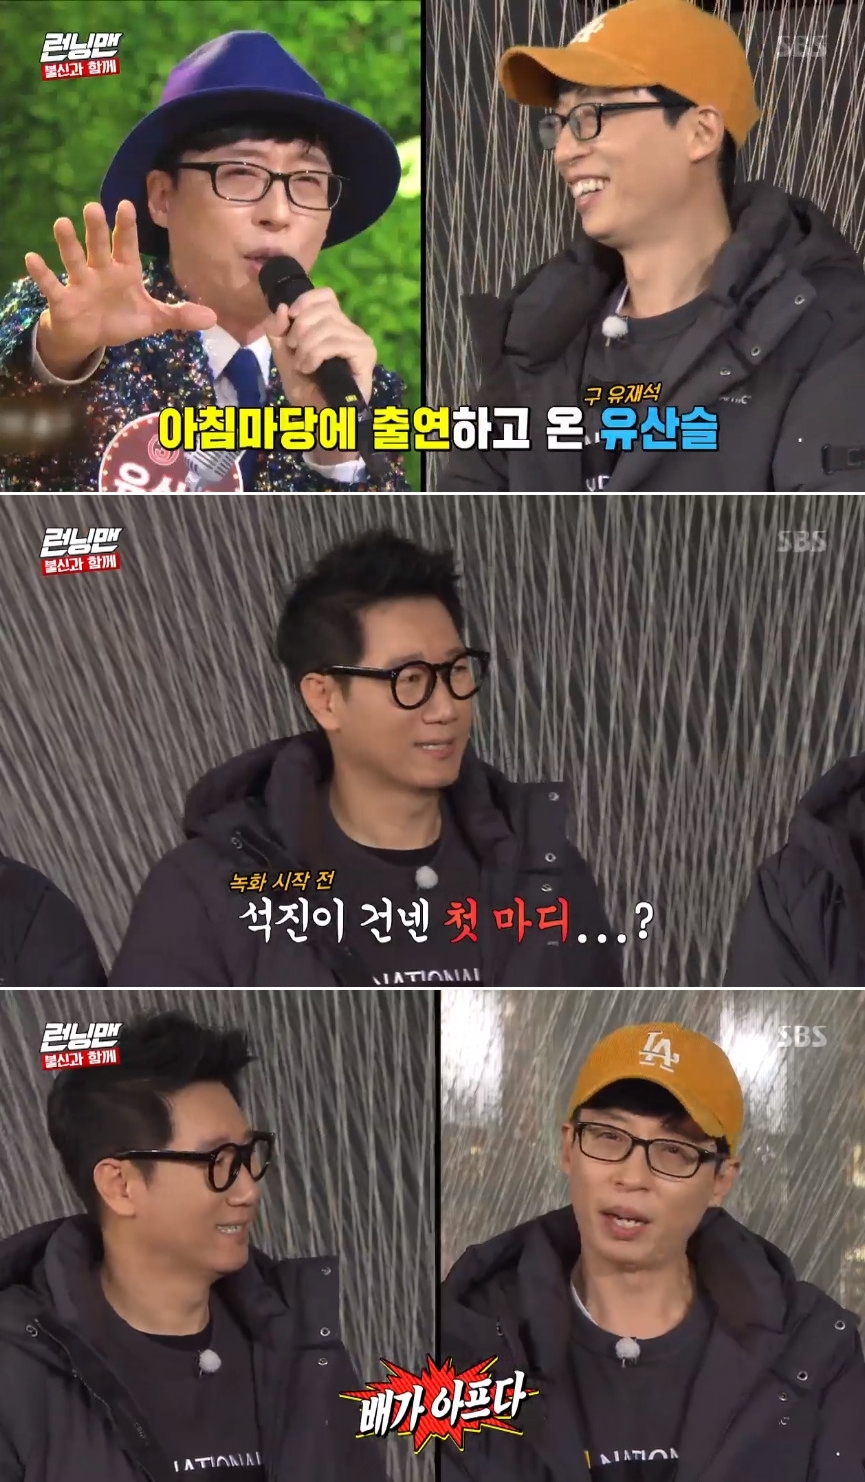 Seoul = = Ji Suk-jin reveals Jealousy about Yoo Jae-SukIn the SBS entertainment program Running Man broadcasted on the afternoon of the afternoon, Ji Suk-jin envied Yoo Jae-Suk, who turned into a trot singer,At the opening of the day, Ji Suk-jin asked the members, Have you seen AM Plaza today?Yoo Jae-Suk has appeared on KBS AM Plaza as a trot singer Heritage castle.You Yoo Jae-Suk and Heritage Castle are in the search terms together, and Heritage Castle won, Ji Suk-jin said.Yoo Jae-Suk said, As soon as I saw me today, I can not forget what my brother said. My stomach hurts.Nowadays, Seokjin is Jealous to me and Somin, the members asked, Why is Somin envious?Yoo Jae-Suk said, Somin is Jealous because of Somin, making the scene into a laughing sea.Kim Jong-guk, who was next to him, said, Many people envy Seok-jin Lee. I envy him for living like a bachelor.Yoo Jae-Suk said, But my sister-in-law lives like that. She sang Jennys Solo song and laughed.Ji Suk-jin said, I really envy Heritage castle while the members are playing the full-scale mission game Quiz King Shooter.I have to do it with boredom. Yoo Jae-Suk laughed at the Im bored, how boring.